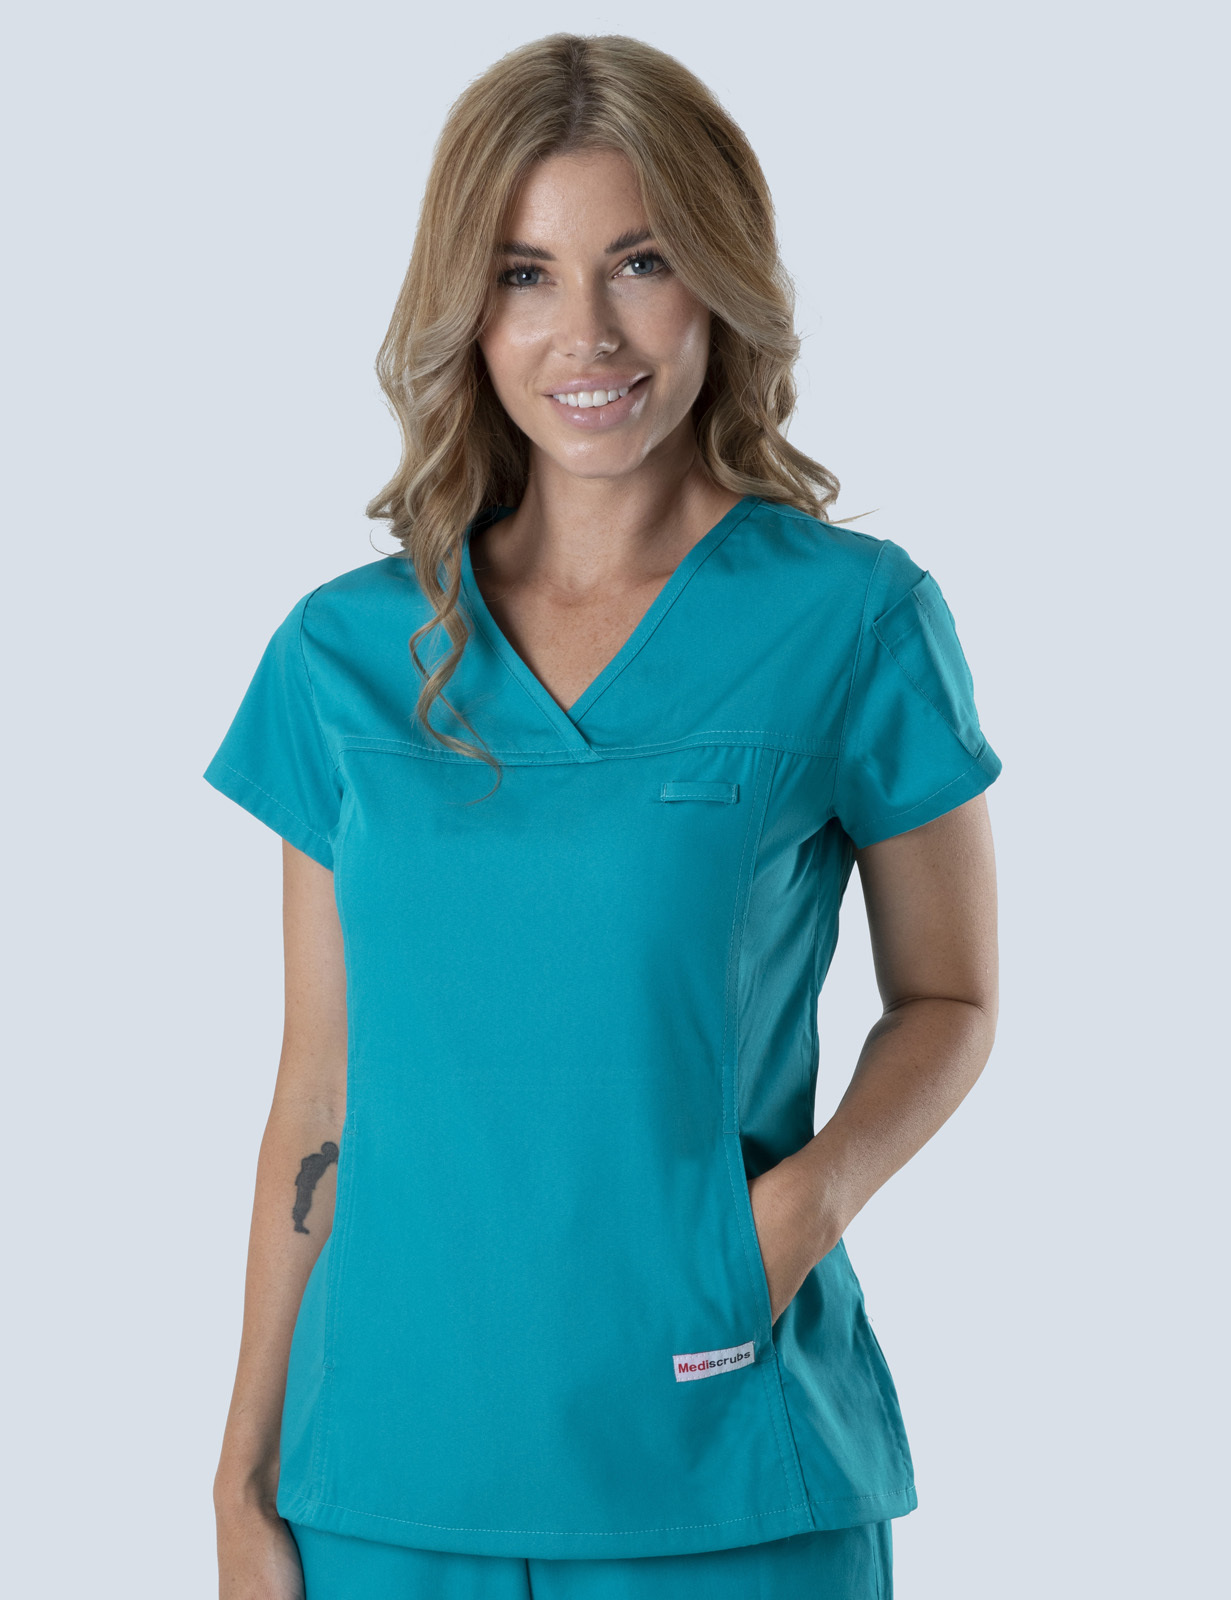 Gold Coast University Hospital Registered Midwife Uniform Set Bundle (Women's Fit Solid Top and Cargo Pants in Teal with Logos)